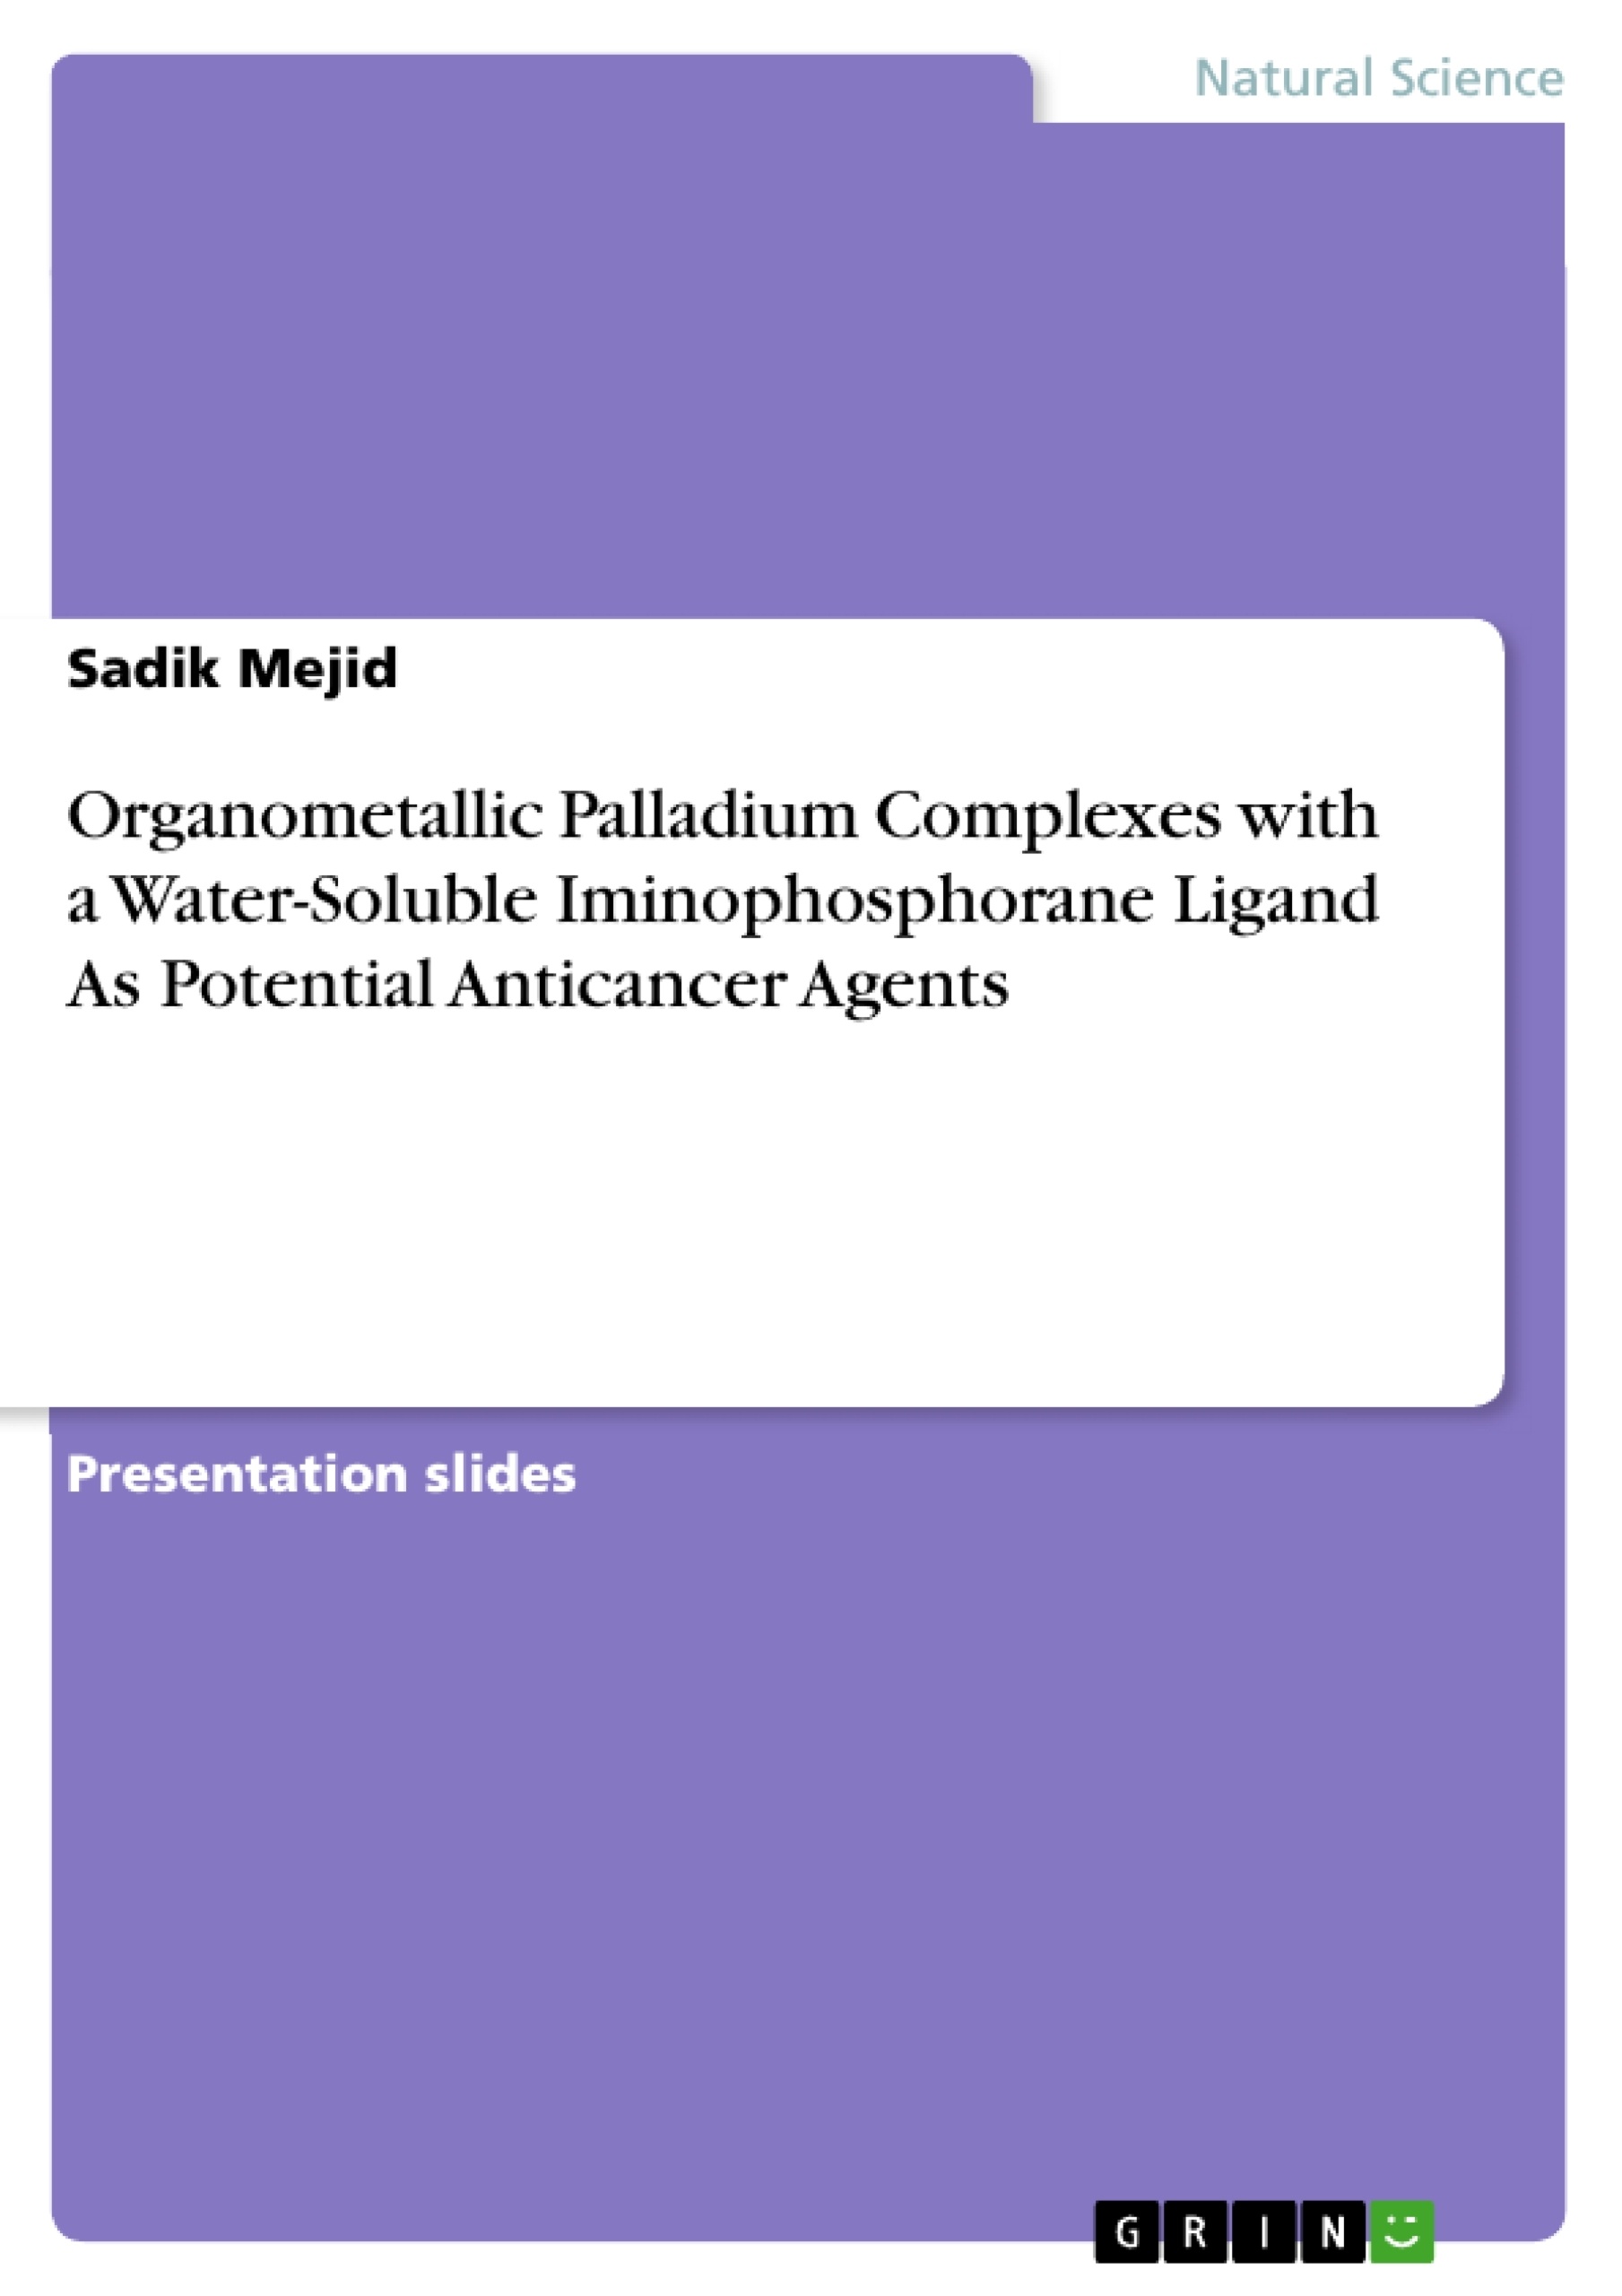 Título: Organometallic Palladium Complexes with a Water-Soluble Iminophosphorane Ligand As Potential Anticancer Agents